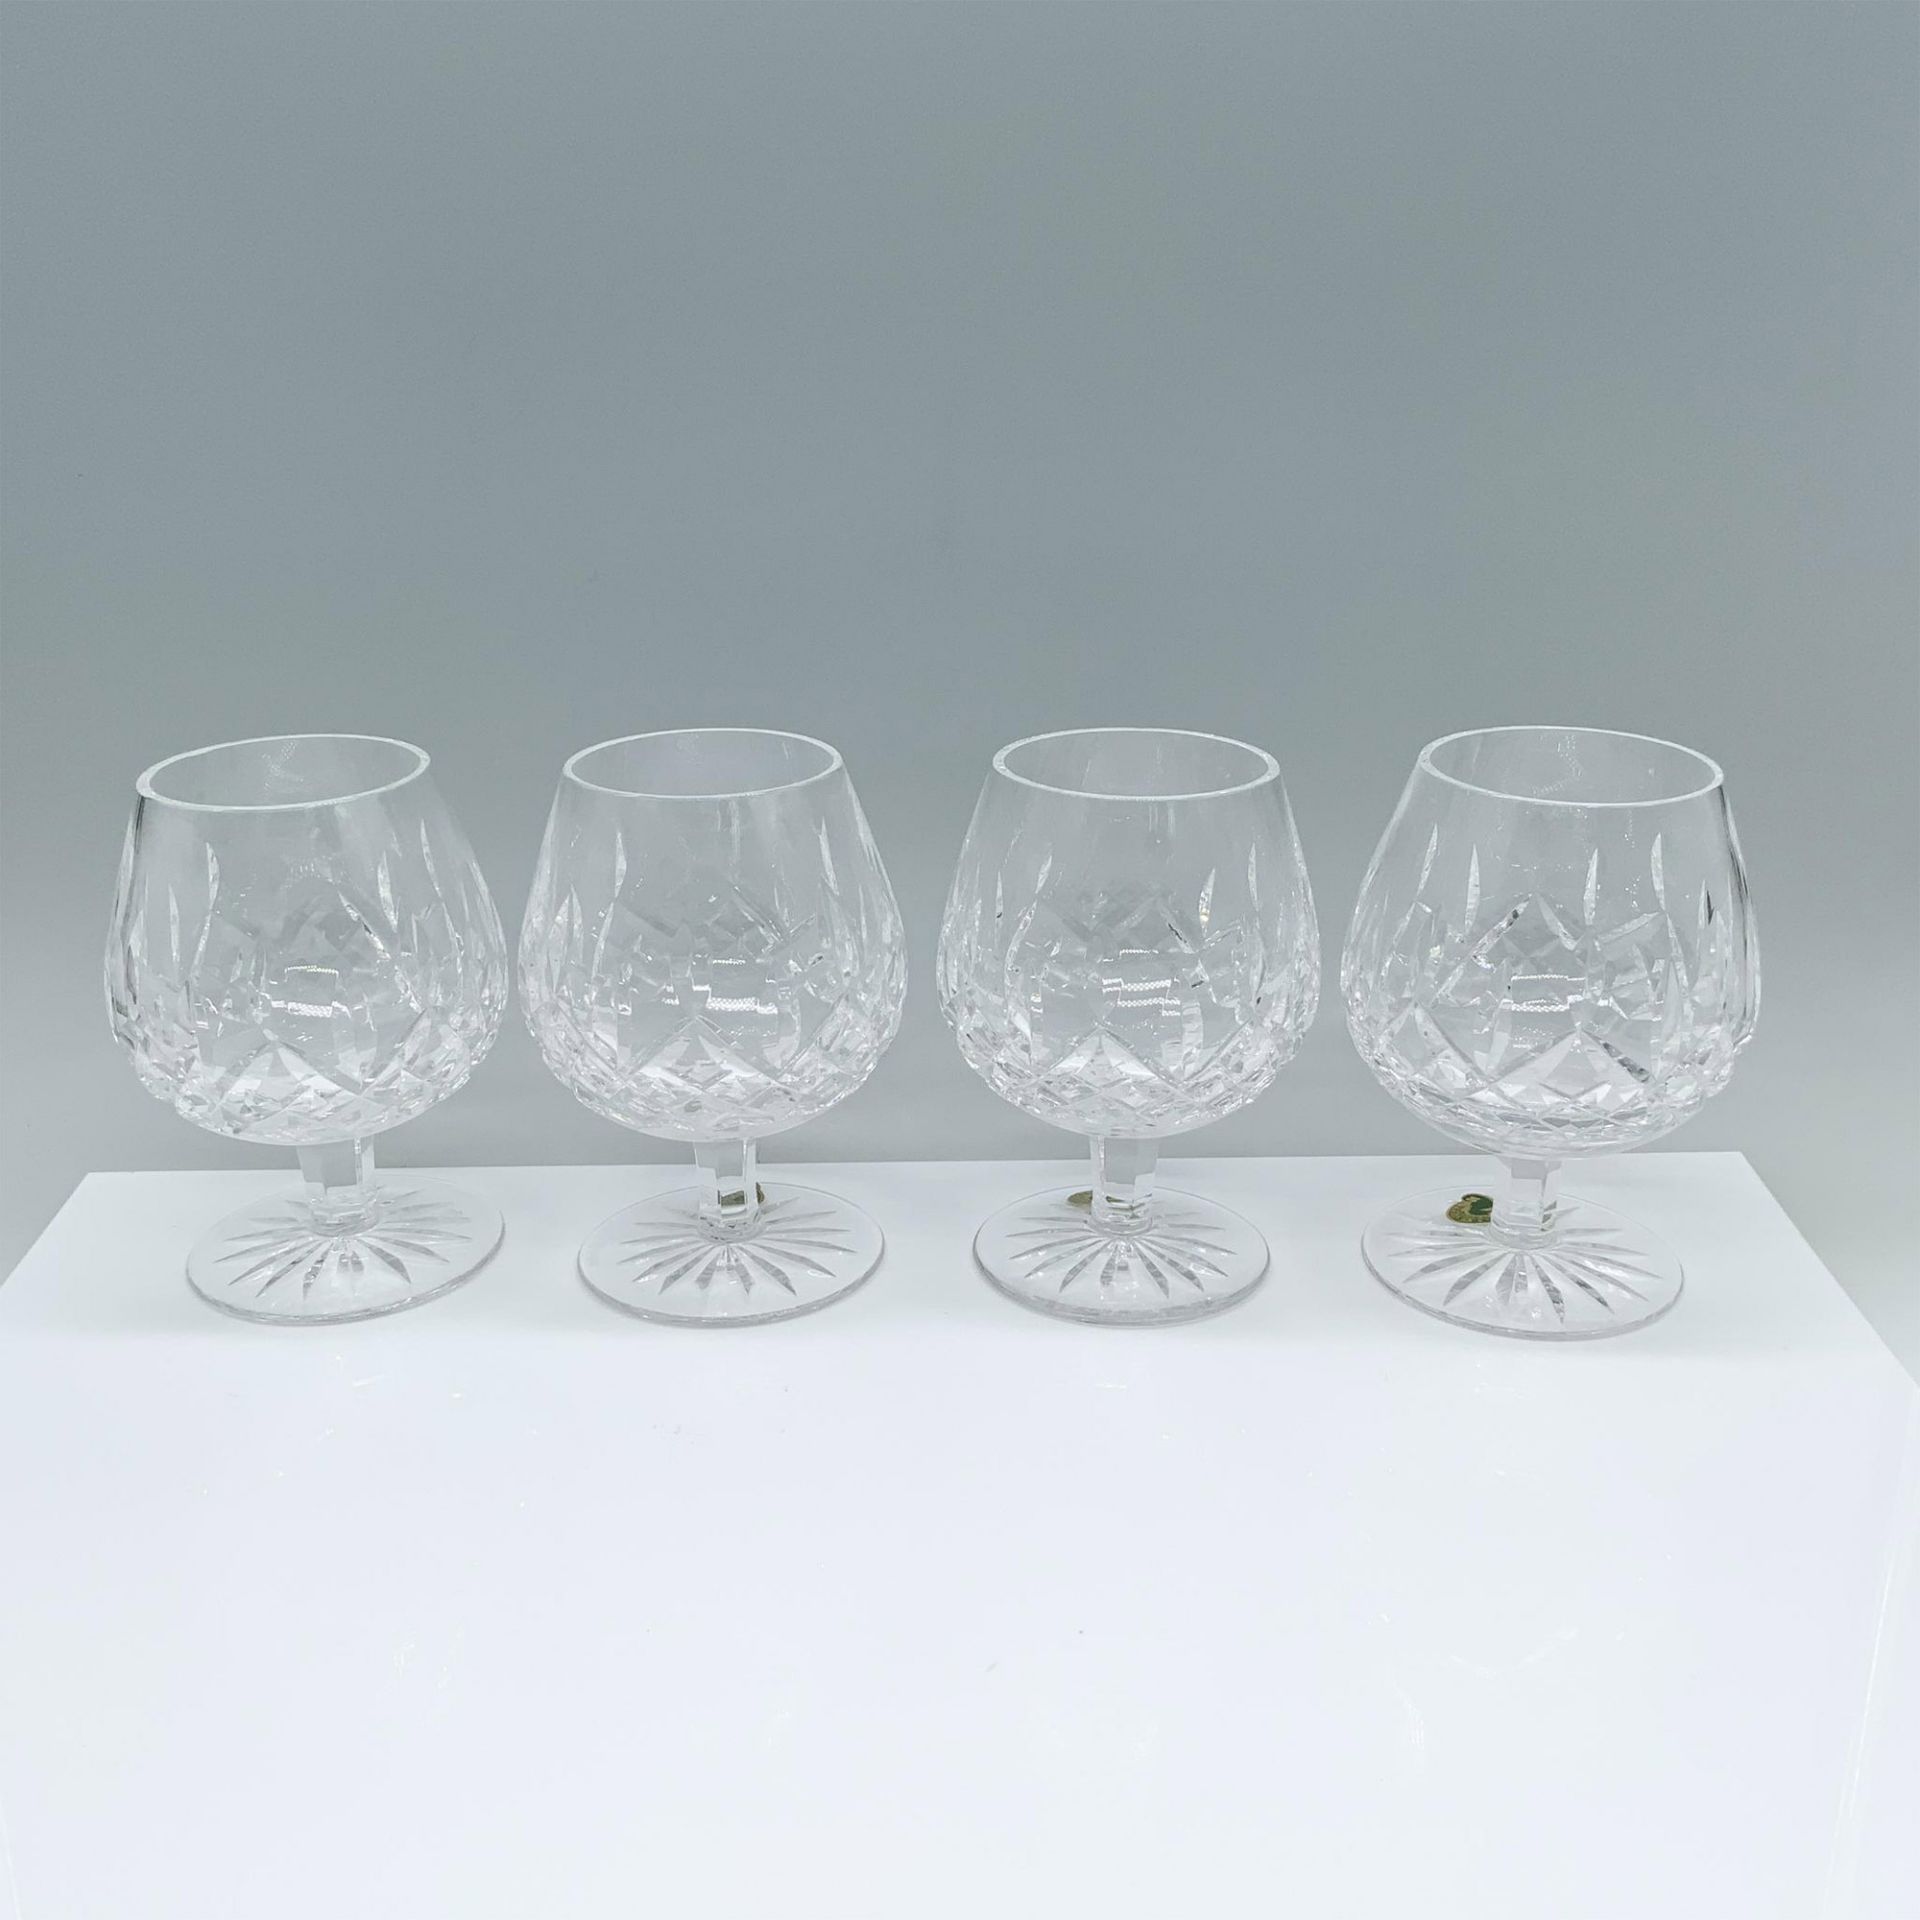 4pc Waterford Crystal Brandy Glasses, Lismore - Image 2 of 4